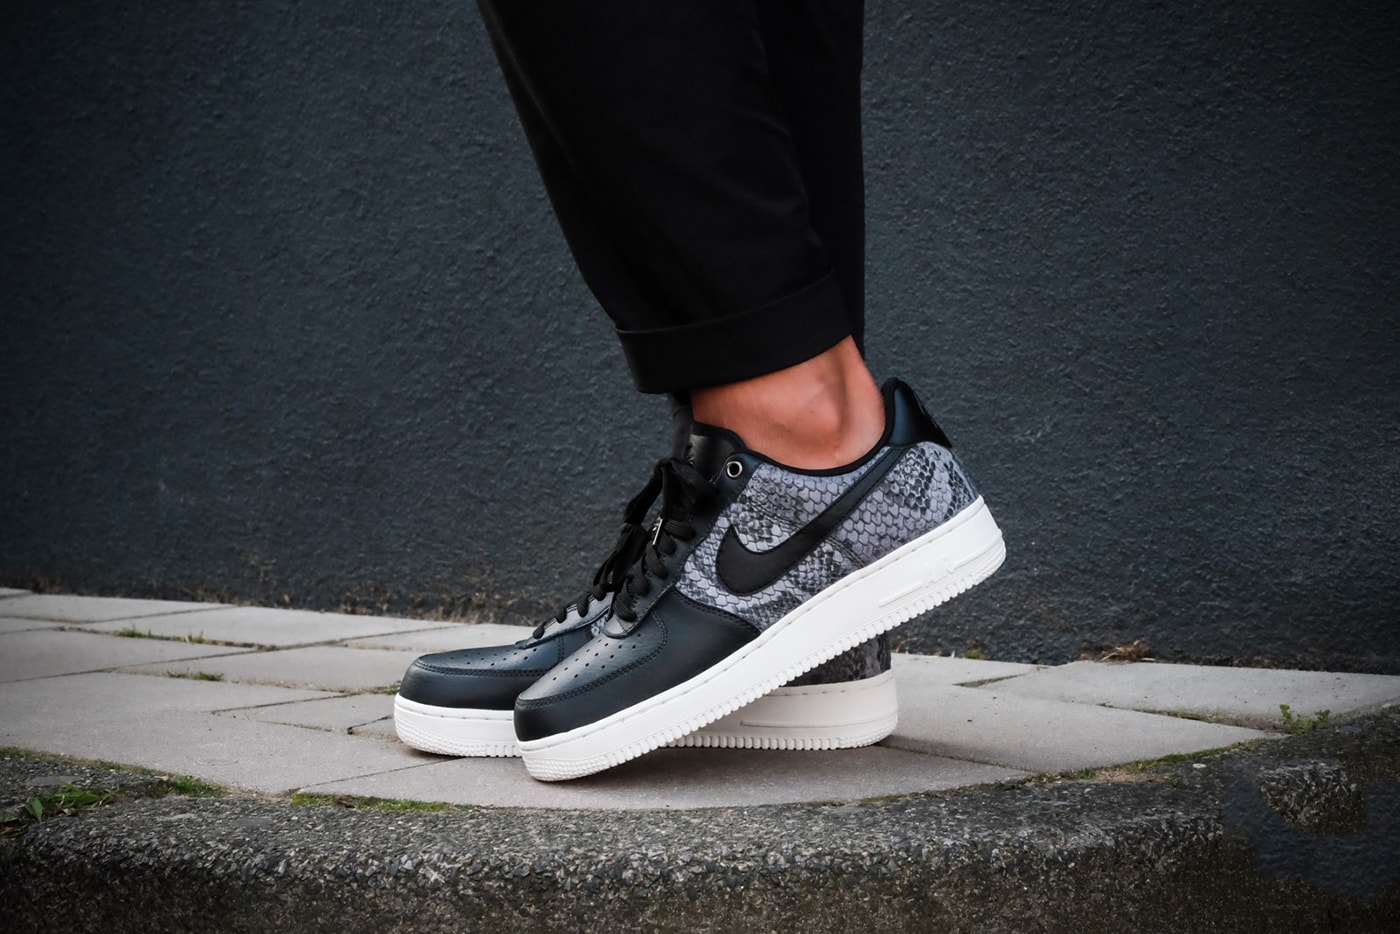 Nike Air Force 1 Low Snakeskin Anthracite Black White